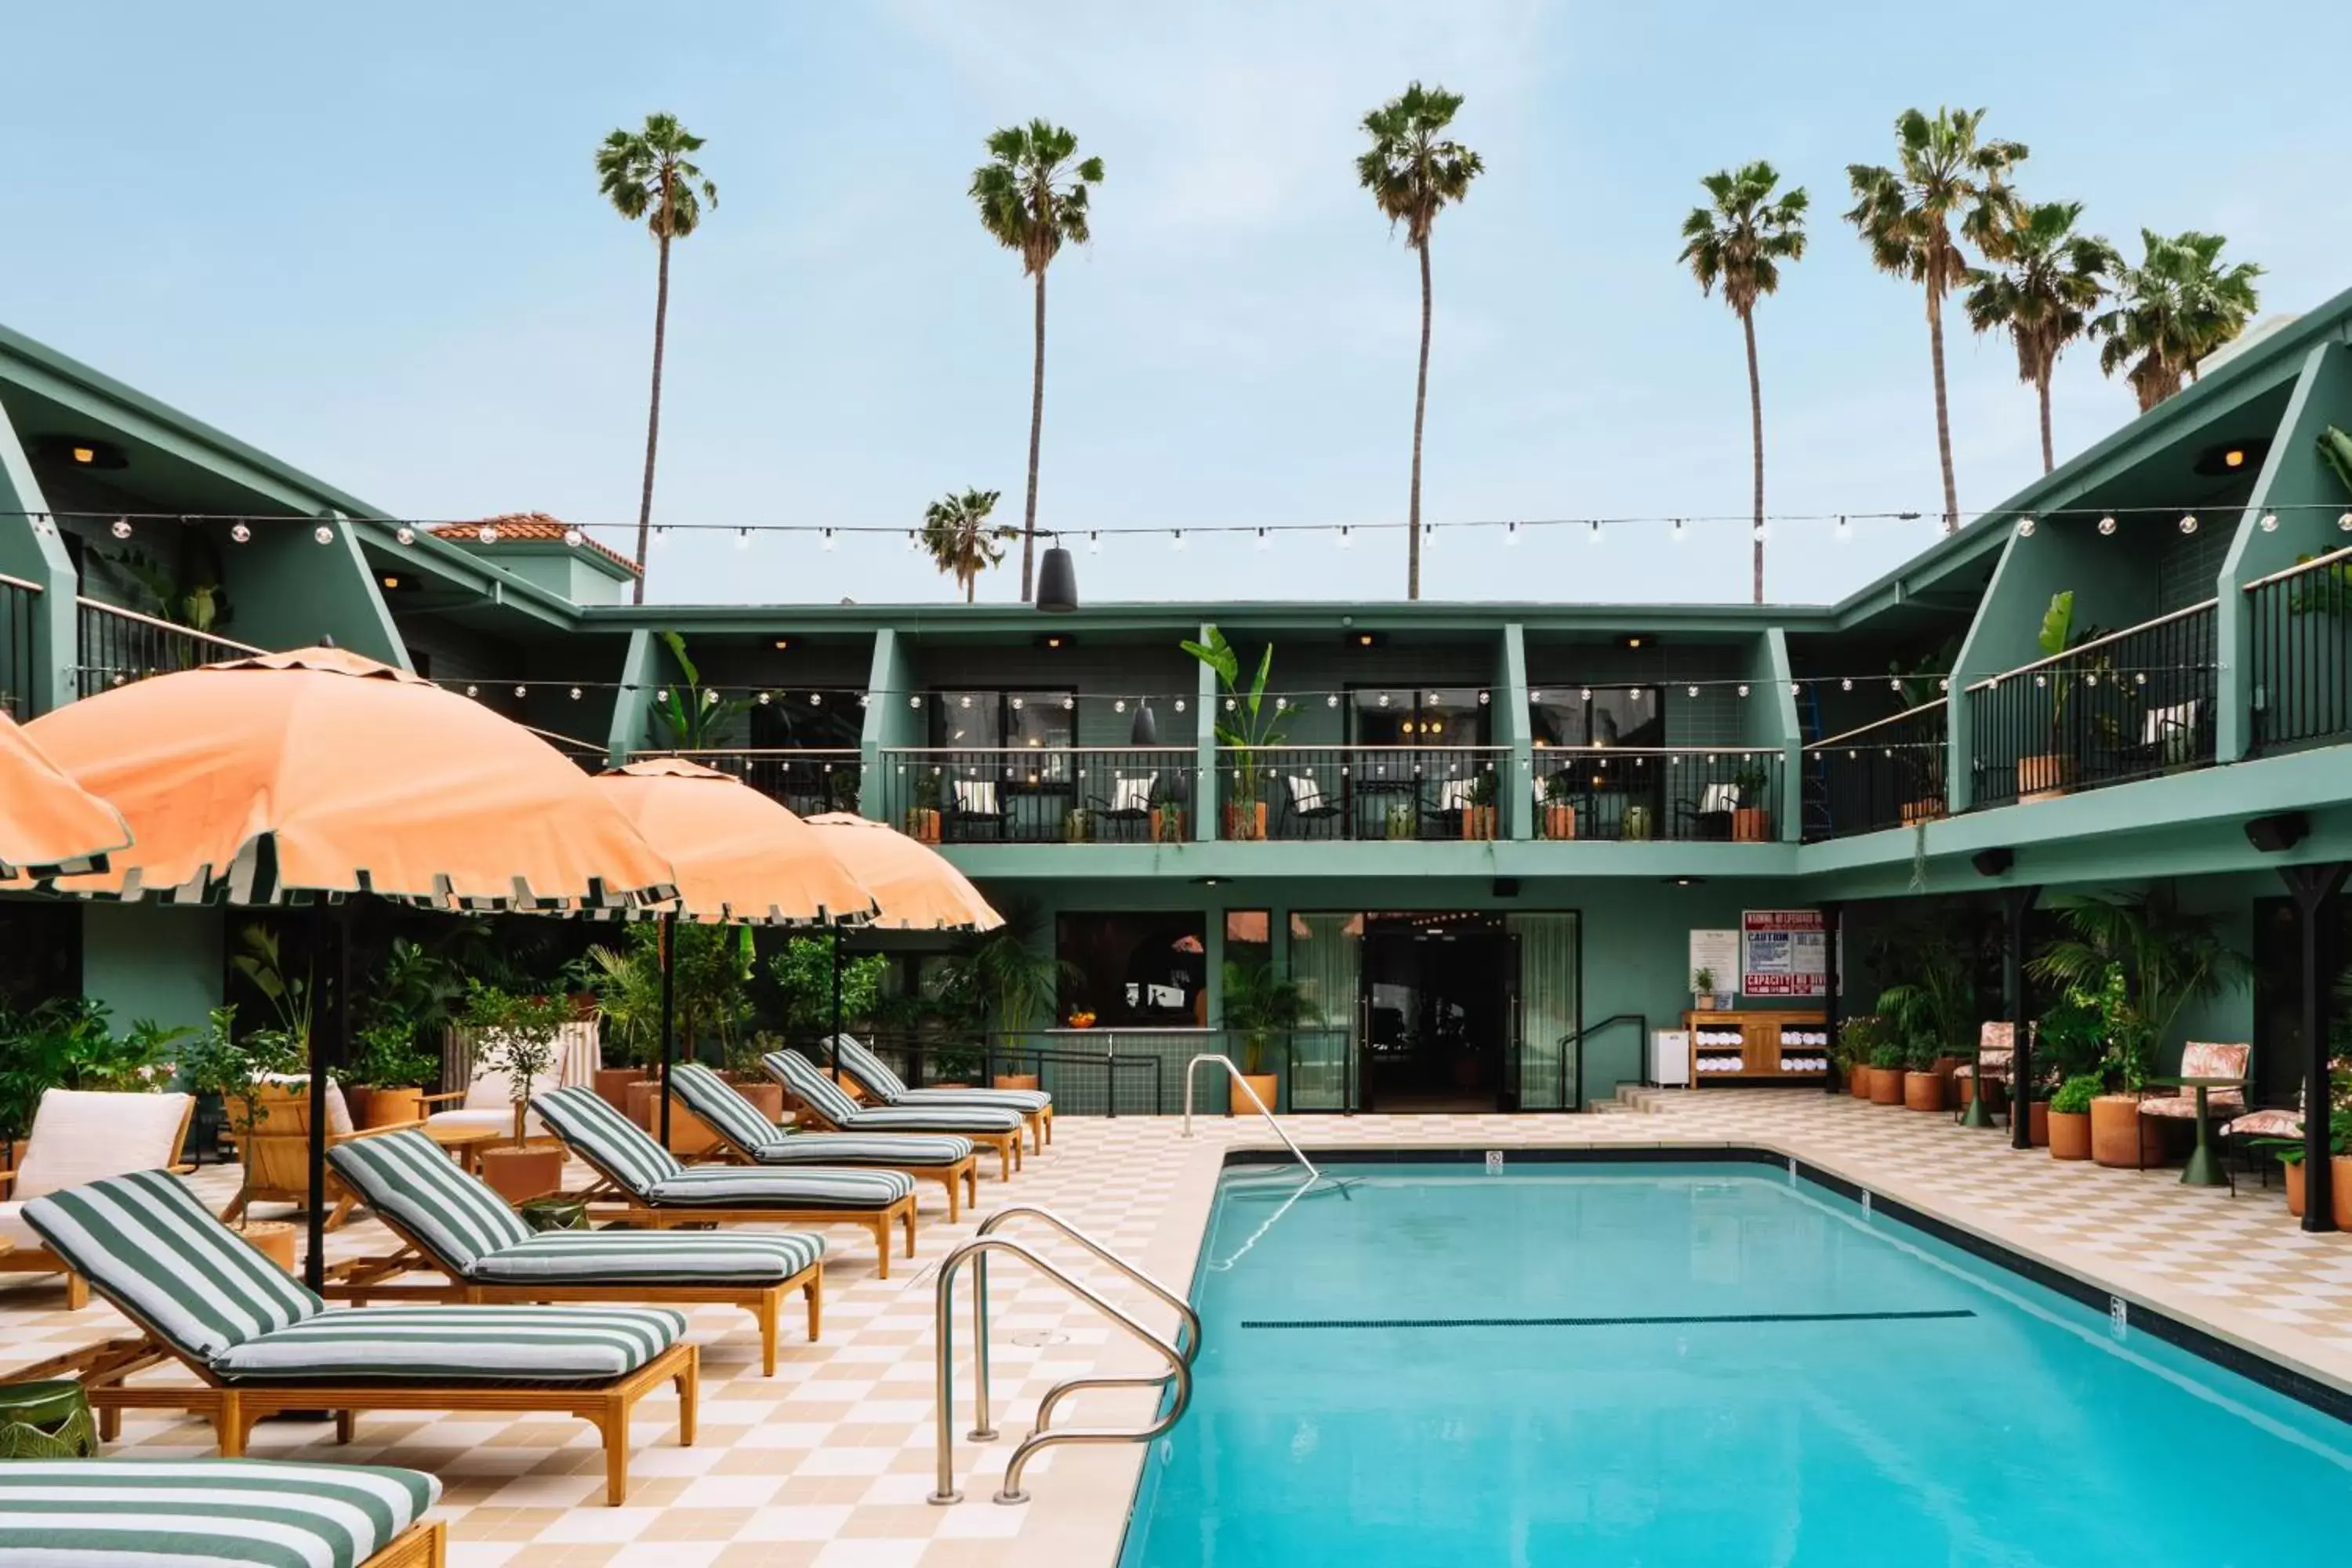 Property building, Swimming Pool in Palihotel Hollywood